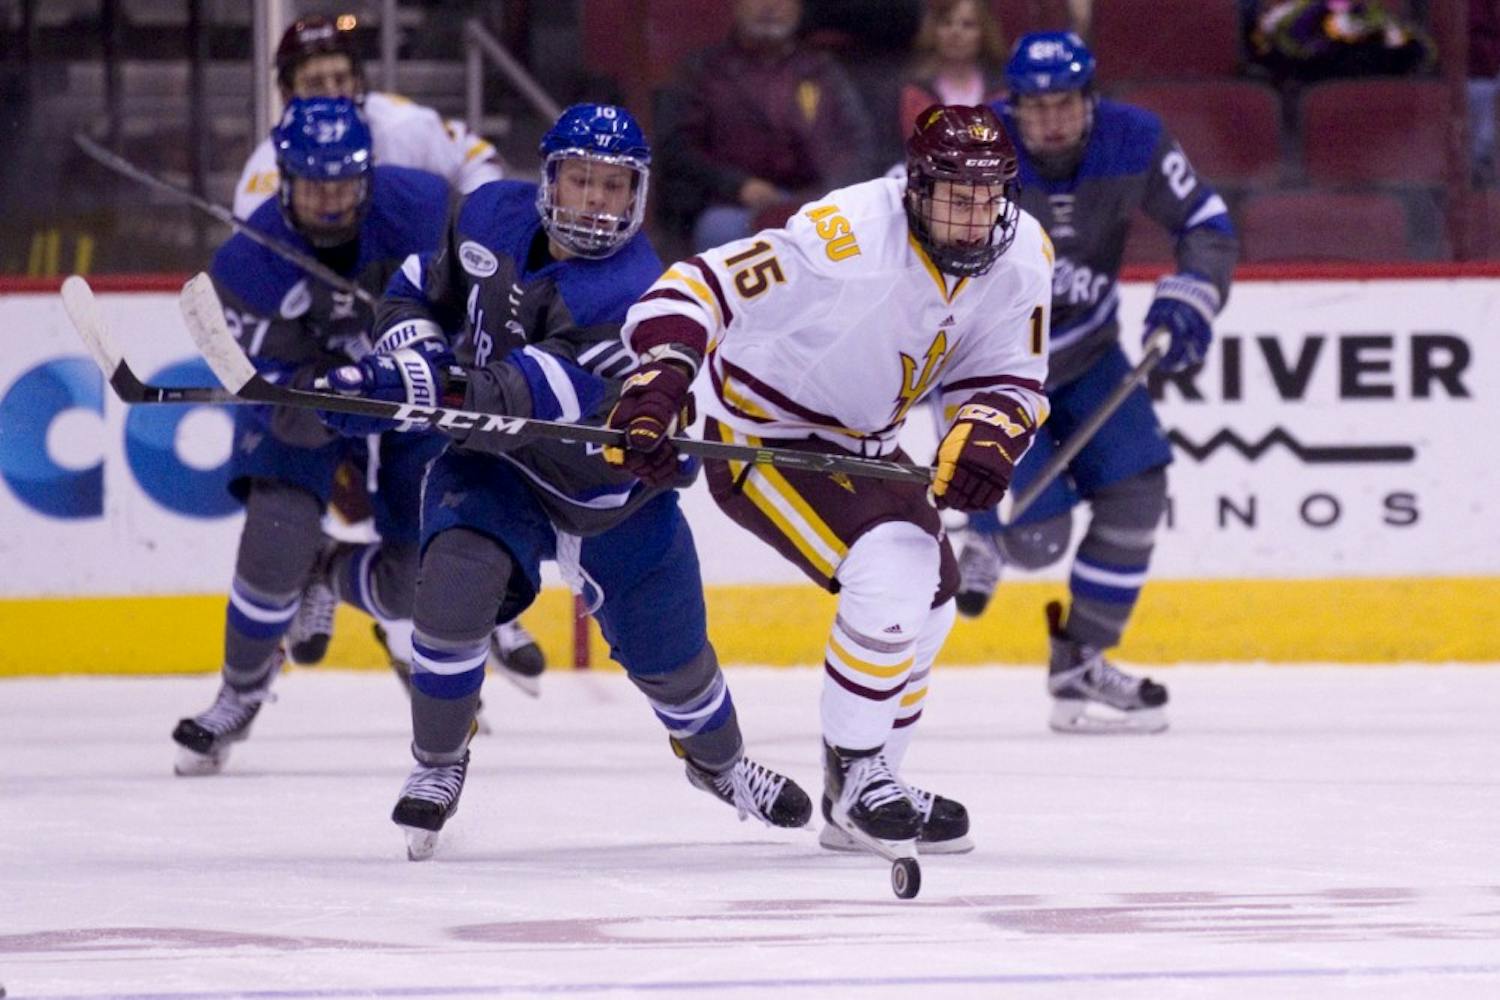 ASU junior right winger Wade Murphy (15) skates down the puck in the first period of a 4-3 loss to the Air Force Academy in Gila River Arena in Glendale, Arizona, on Friday, Oct. 14, 2016.